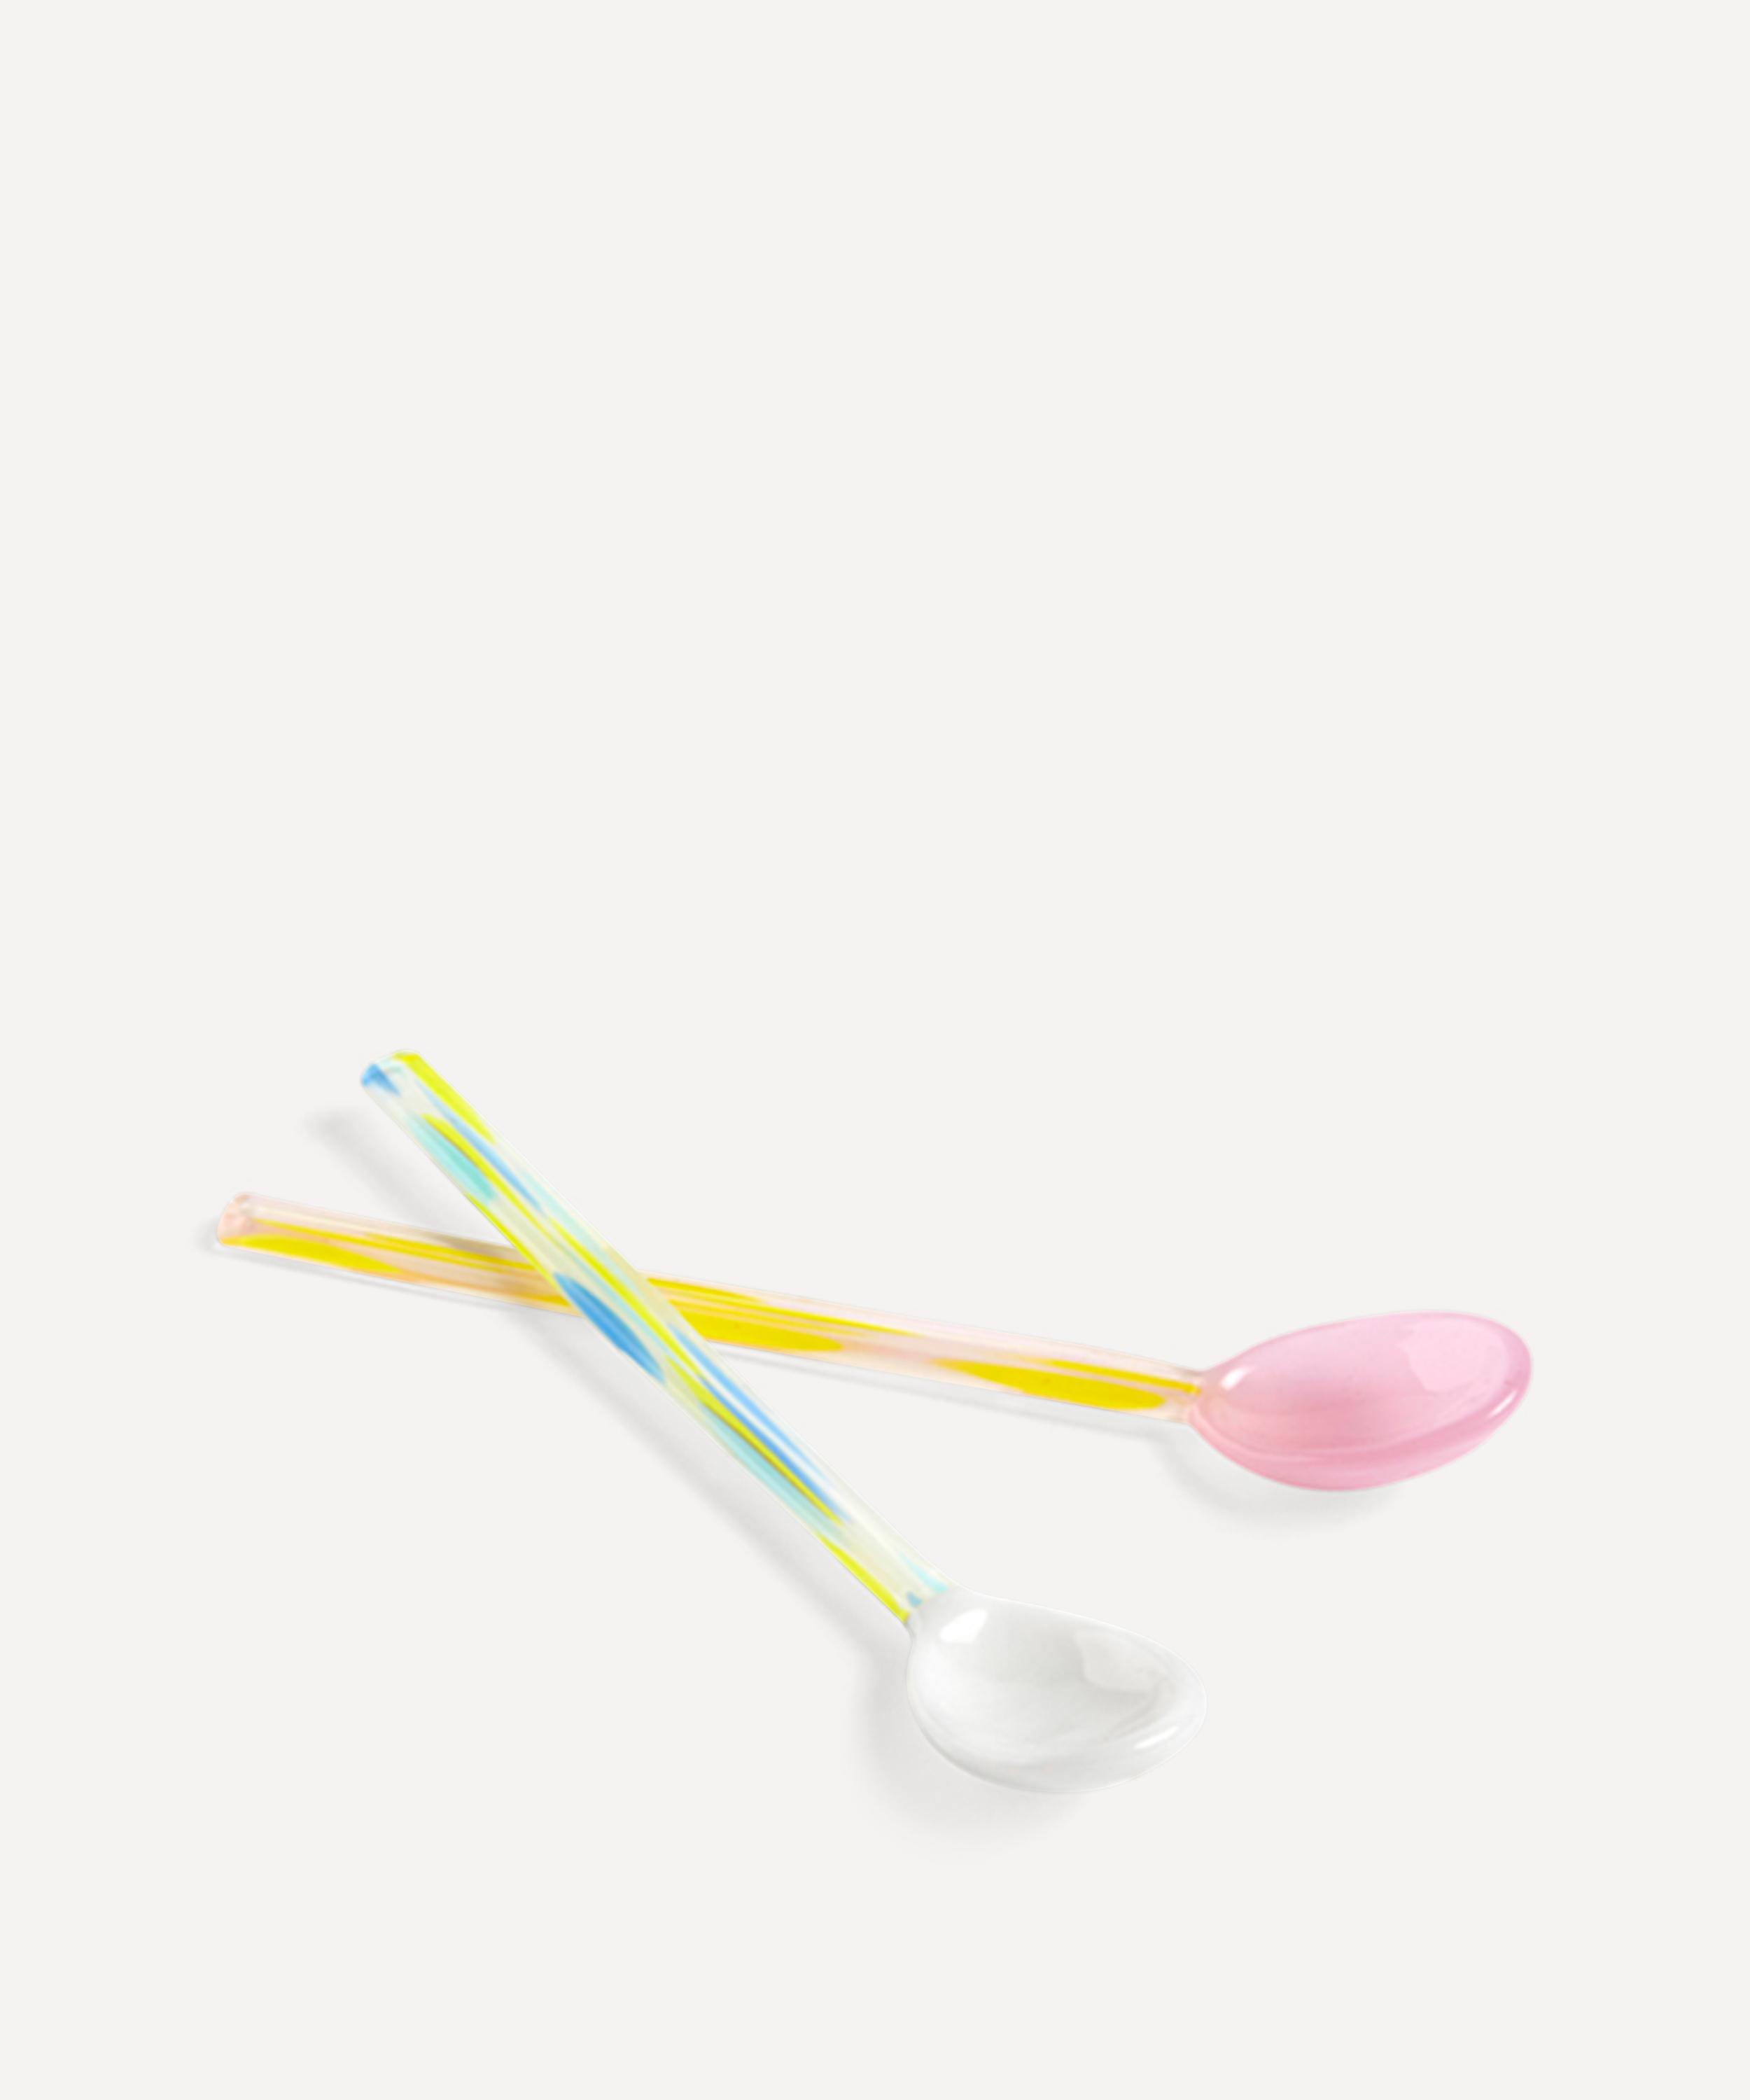 HAY GLASS SPOONS FLAT SET OF TWO,000724595